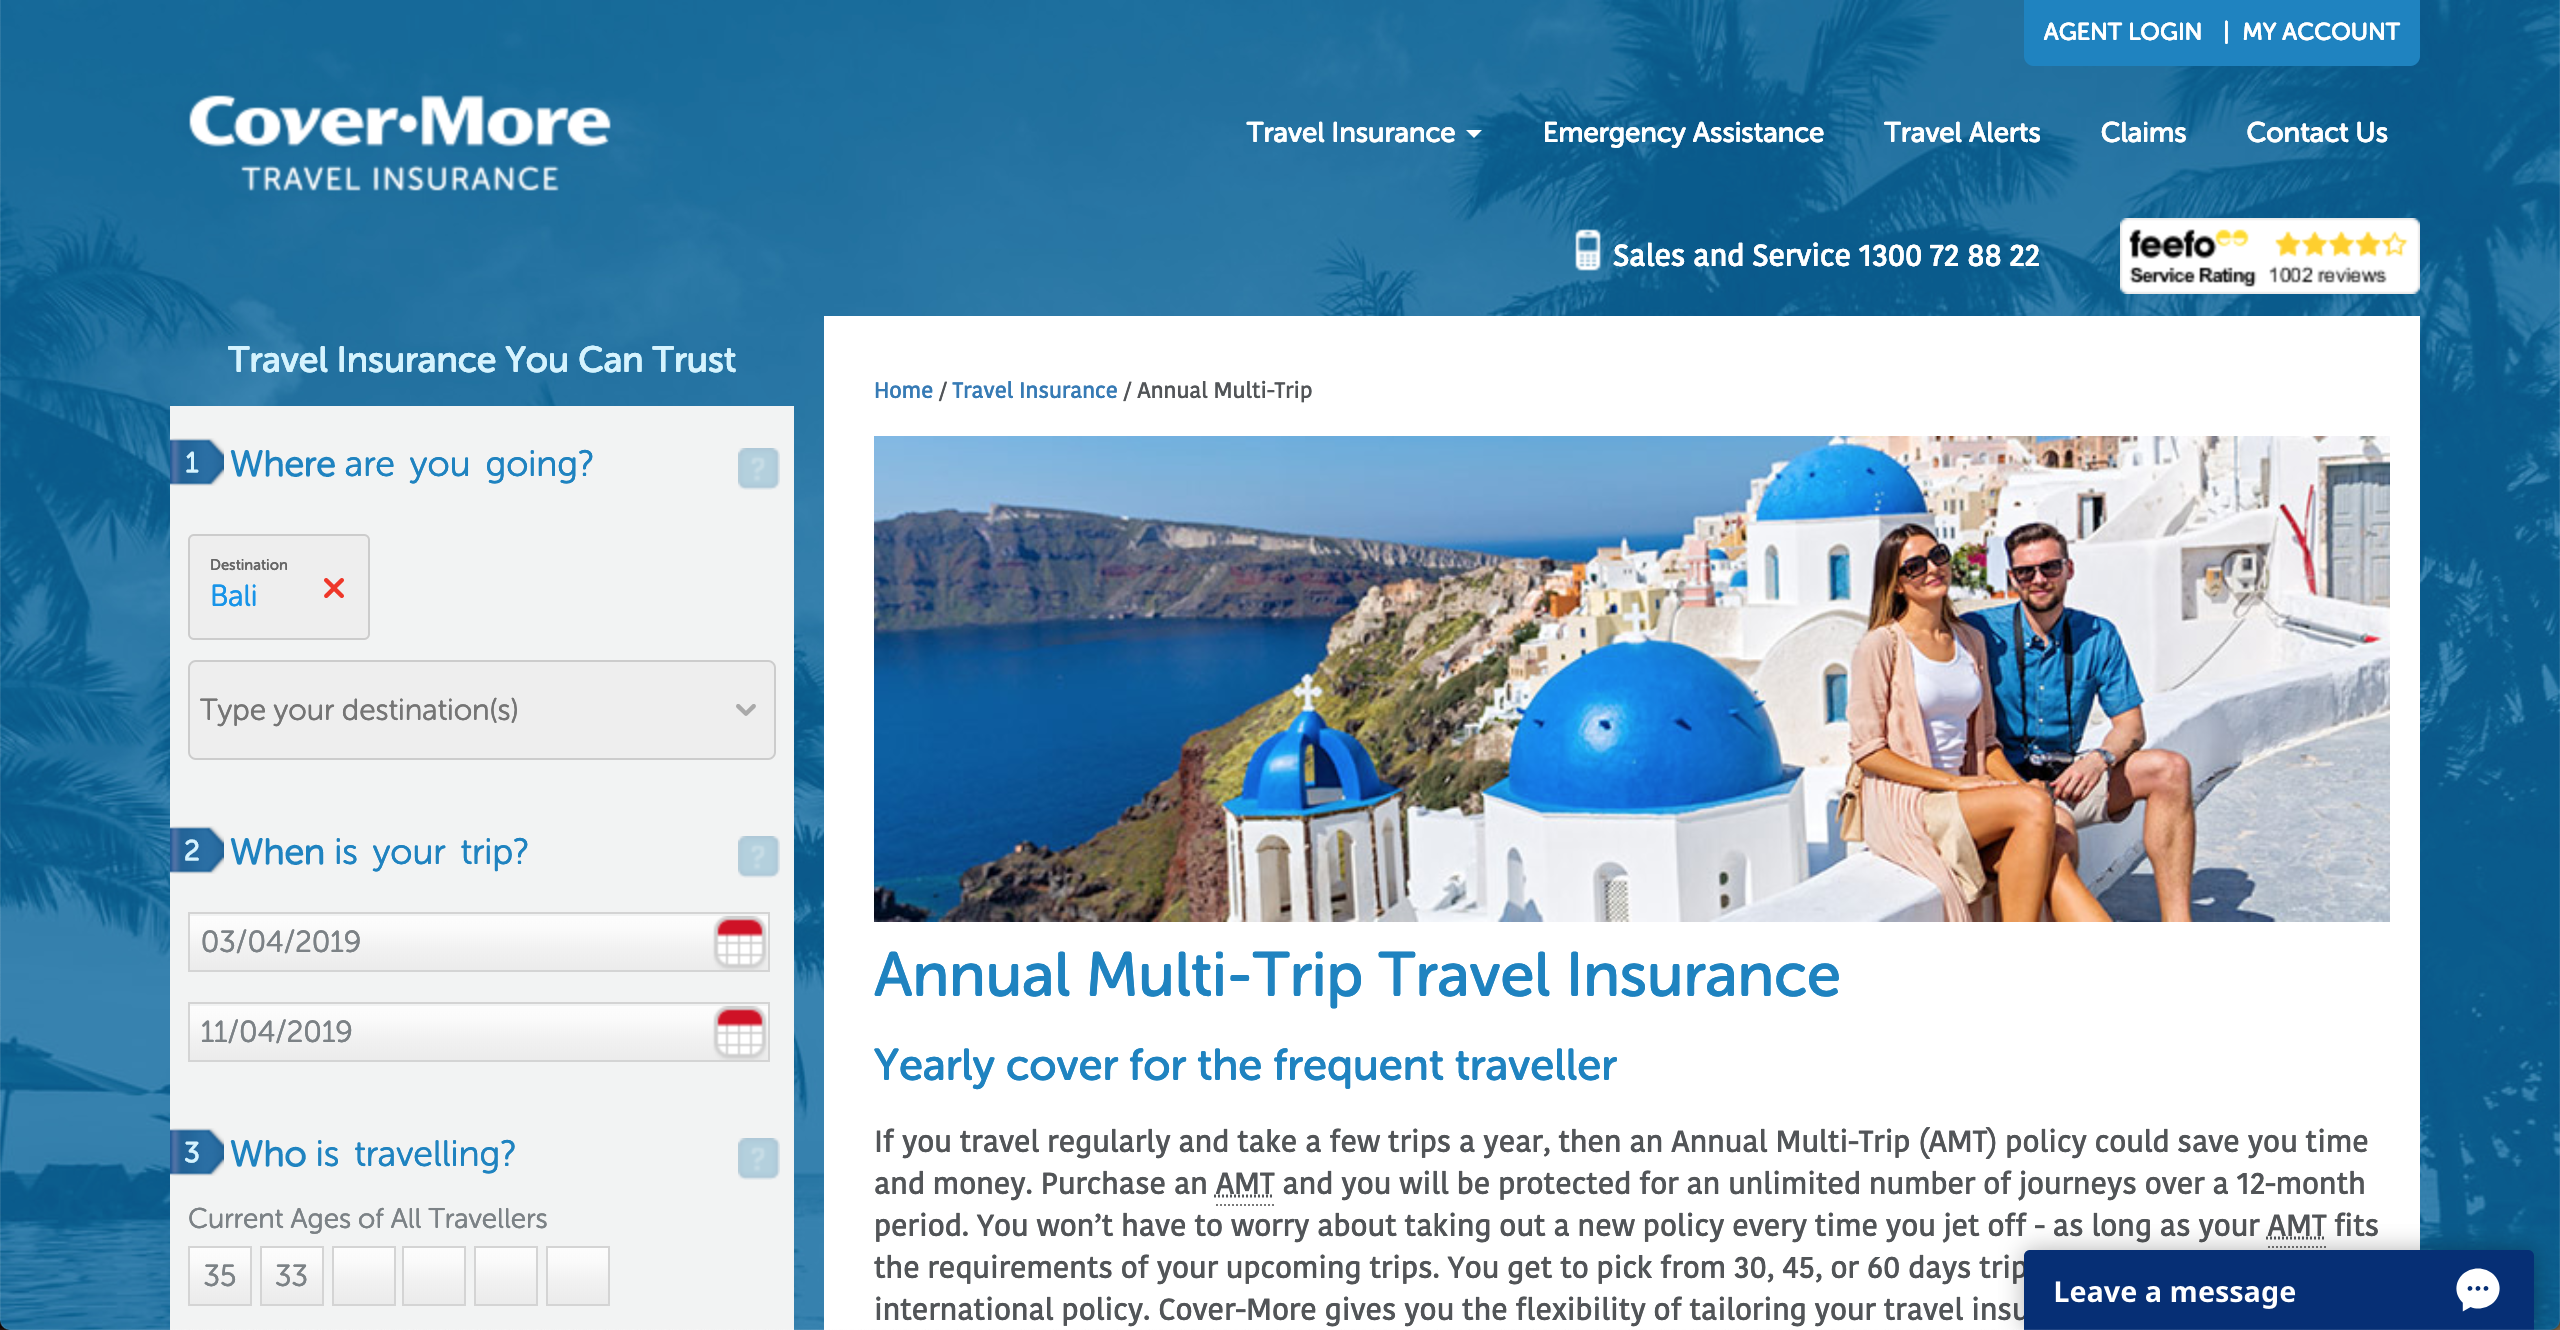 covermore travel insurance alcohol limit